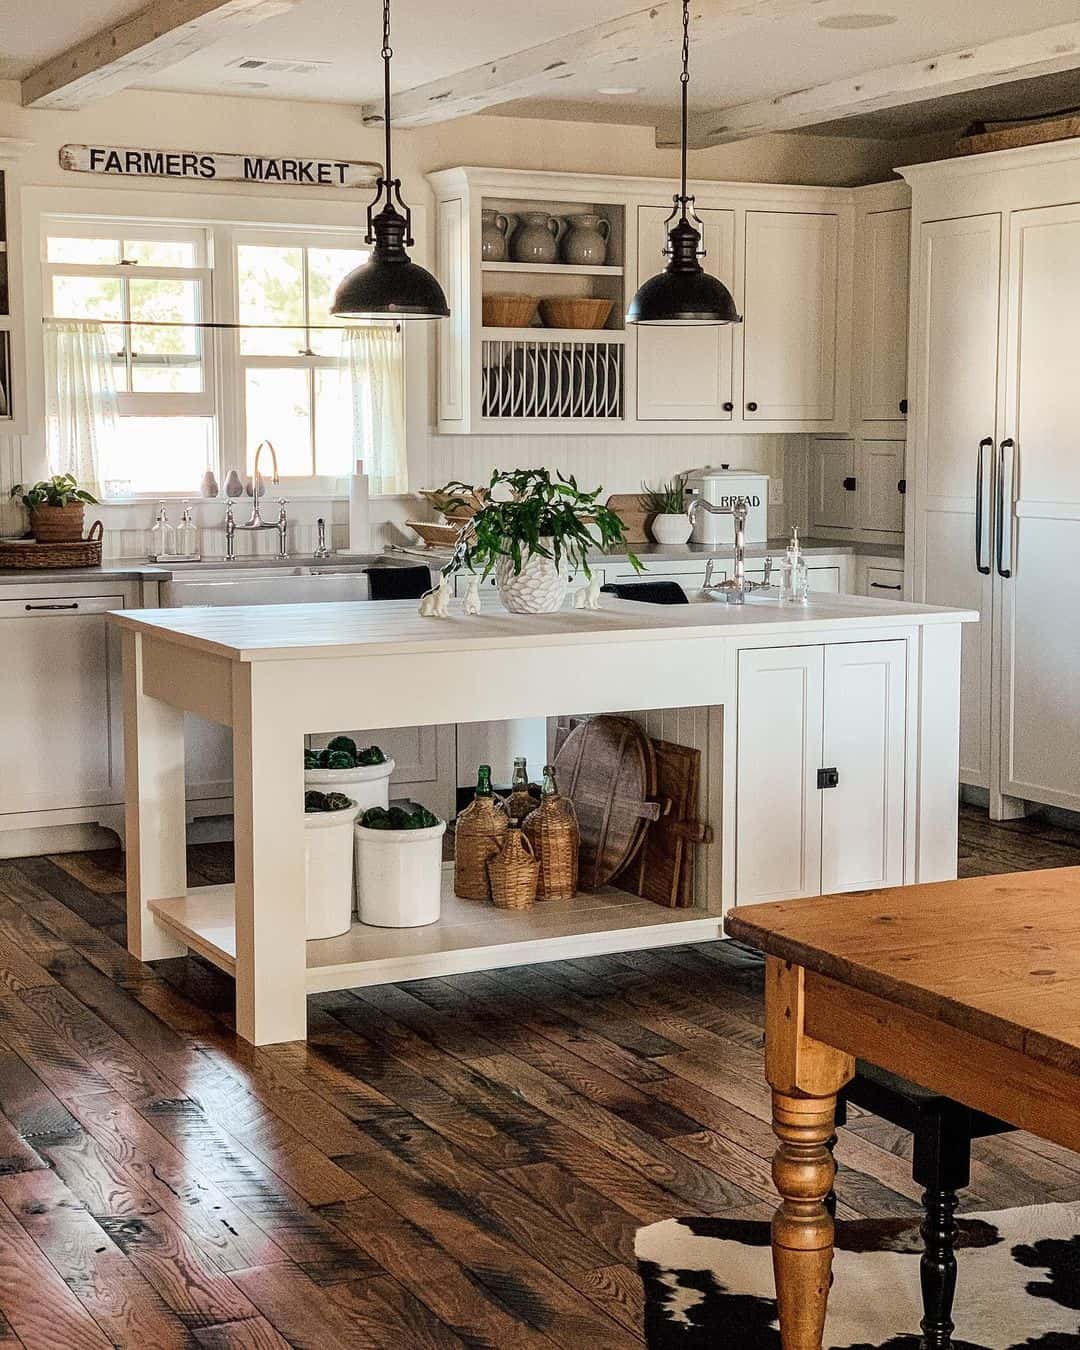 Open Shelves with White Canisters on Kitchen Island